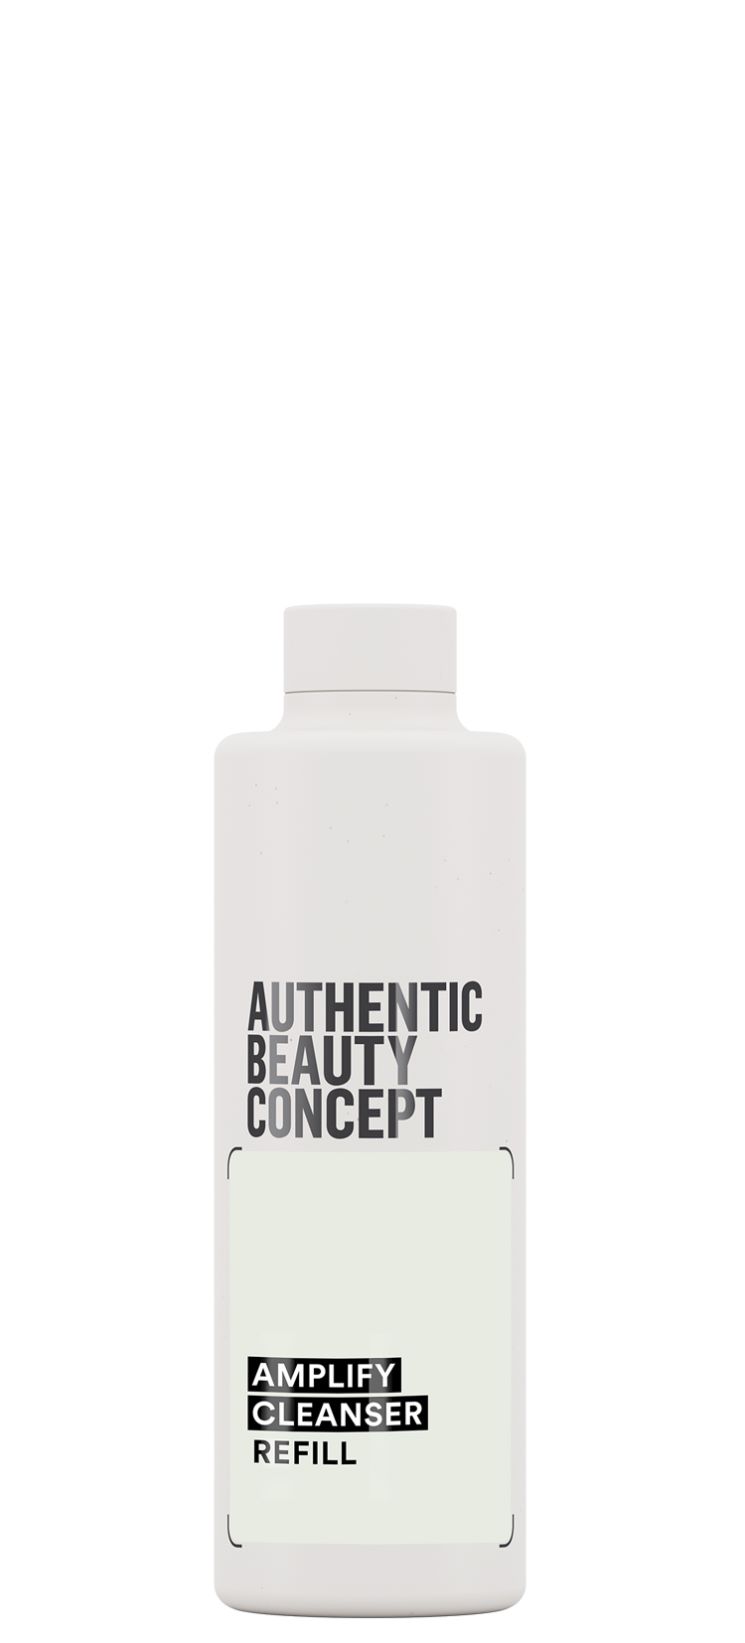 AMPLIFY CLEANSER REFILL